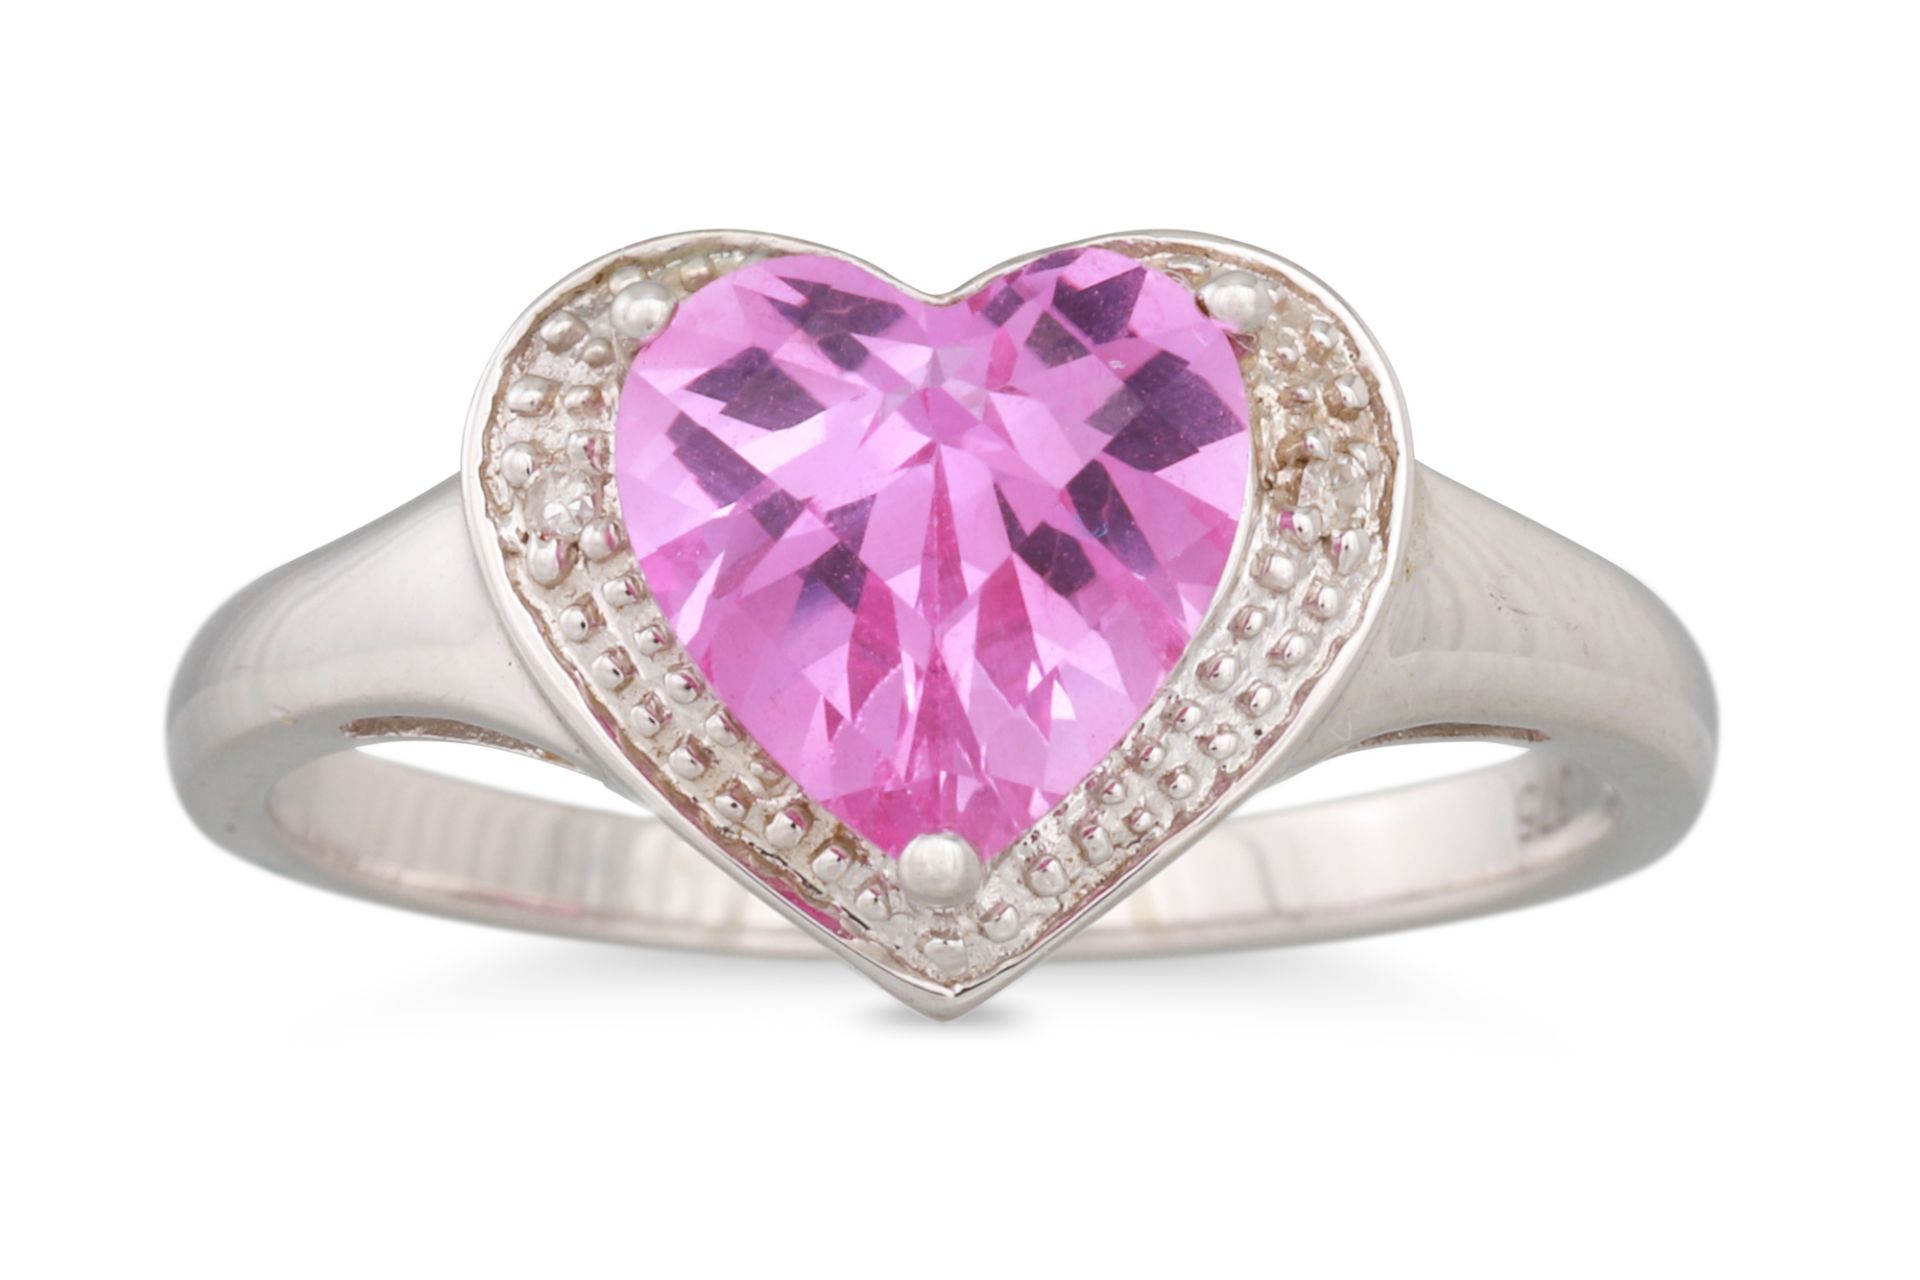 A HEART SHAPED CLUSTER RING, the heart shaped pink stone to diamond accents, mounted in white